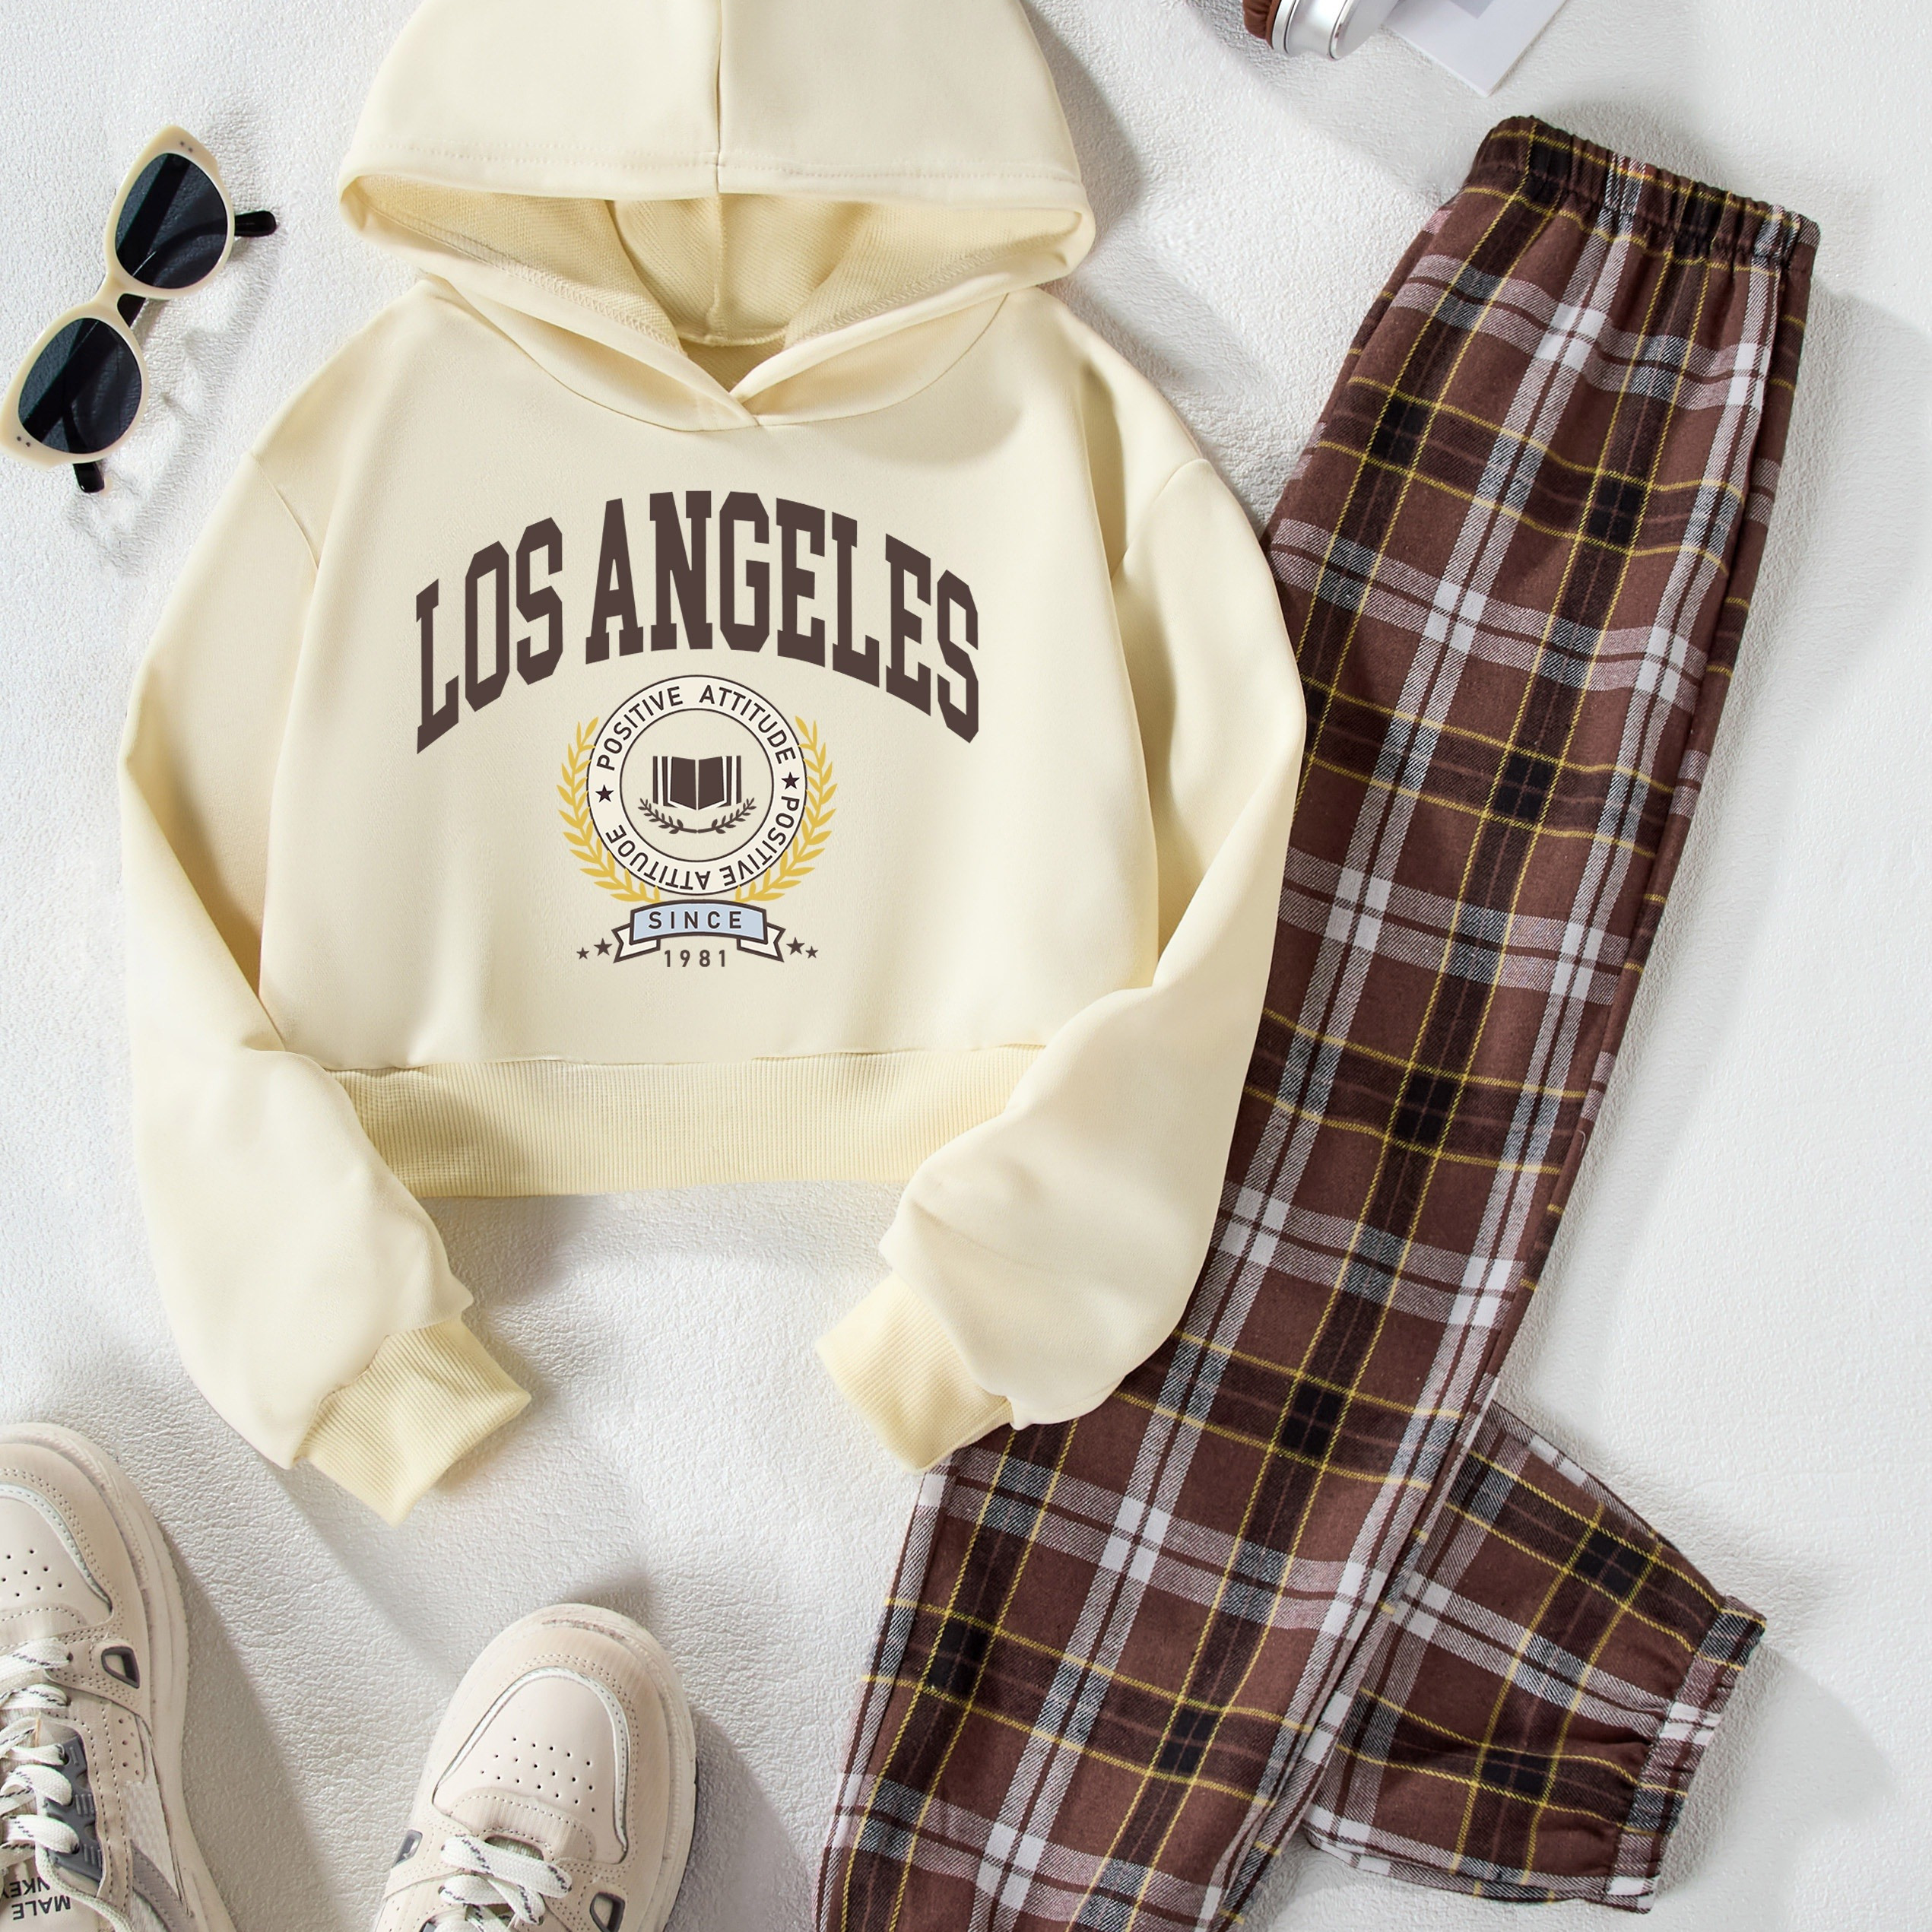 

Letter And School Badge Graphic Print, Girls' 2pcs Outfit, Casual Long Sleeve Hooded Pullover Sweatshirt And Sweatpants Set For Fall And Winter, Girls' Clothing For Outdoor Exercise